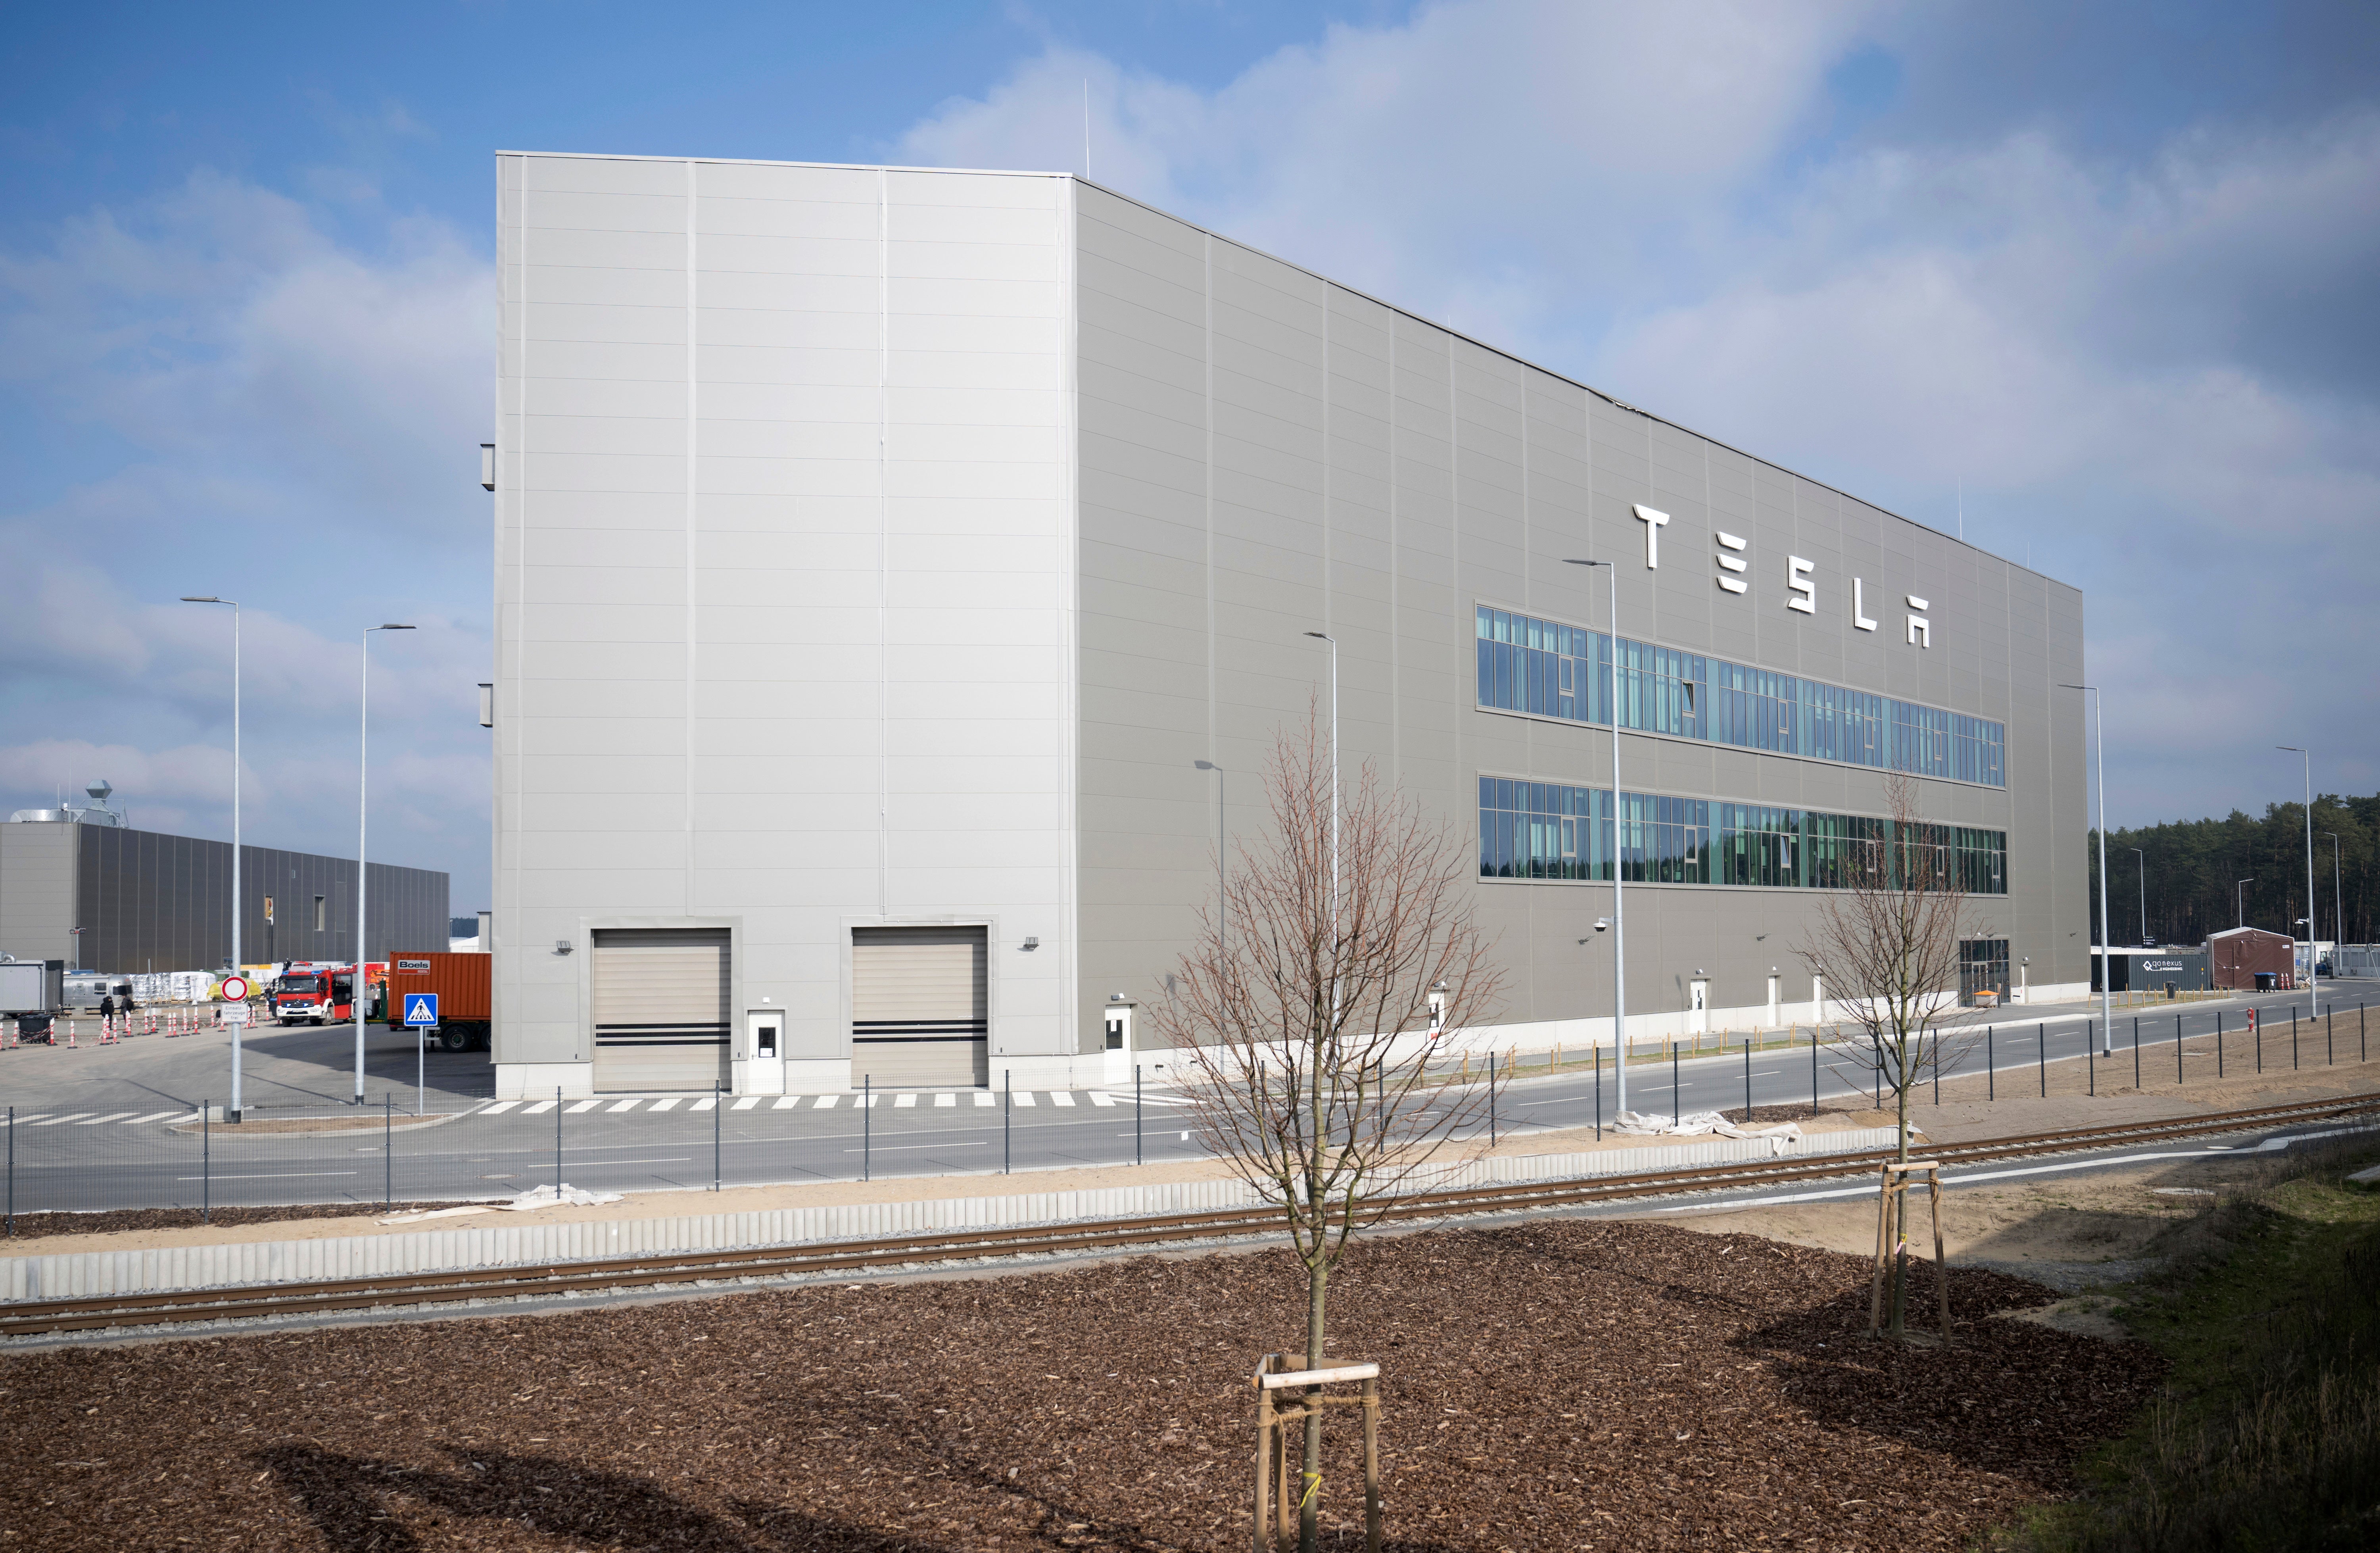 A view of the Tesla car factory after production came to a standstill and workers were evacuated